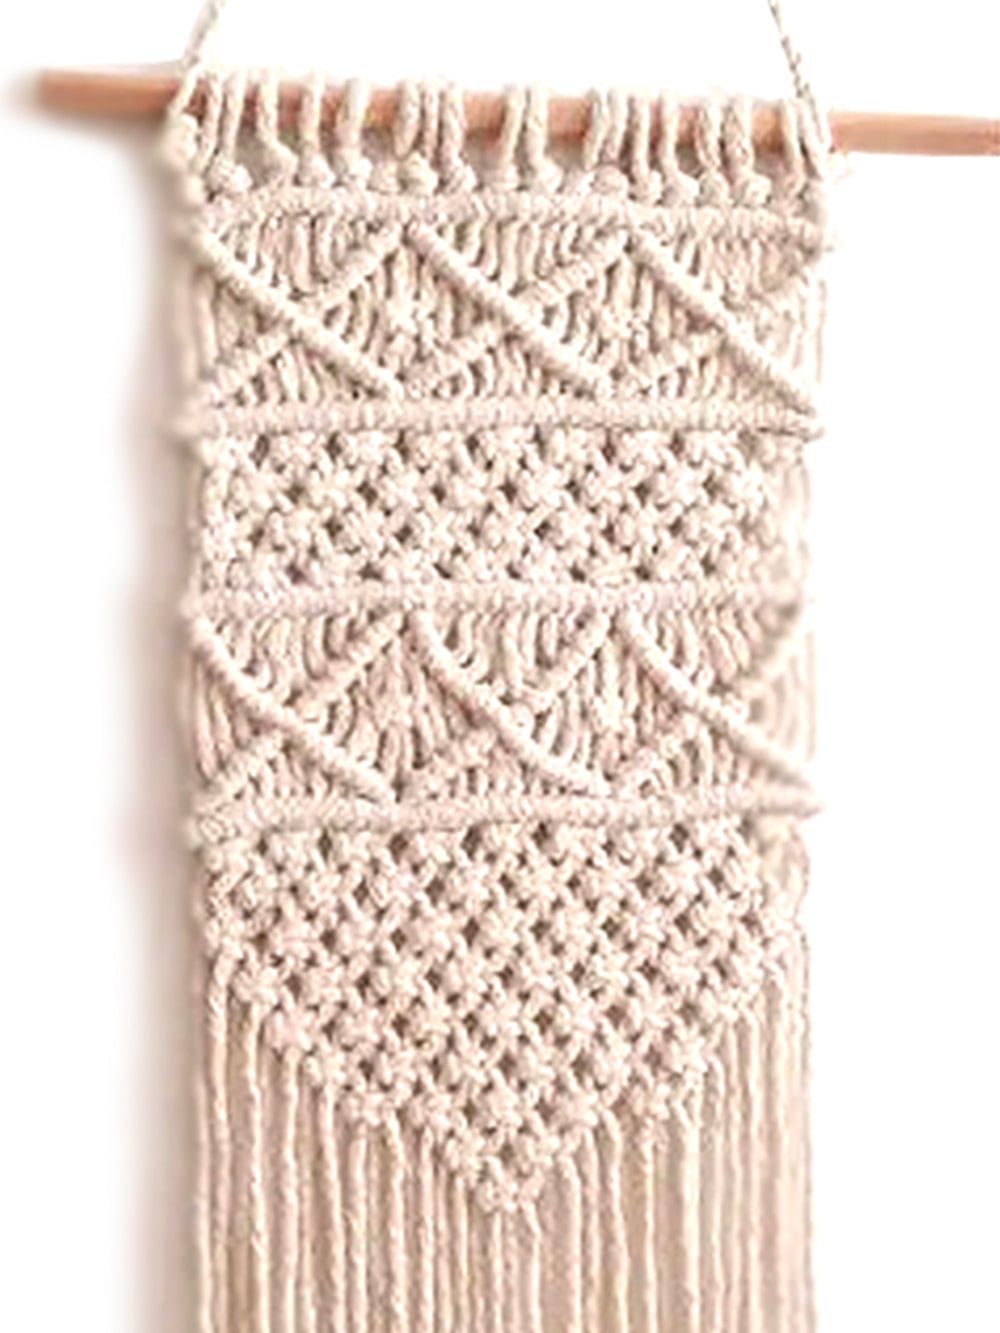 Handcrafted Macrame Wall Hanging Over Crib Wall Hanging Decoration WallKnot Curtains & Drapes WKN0151-1